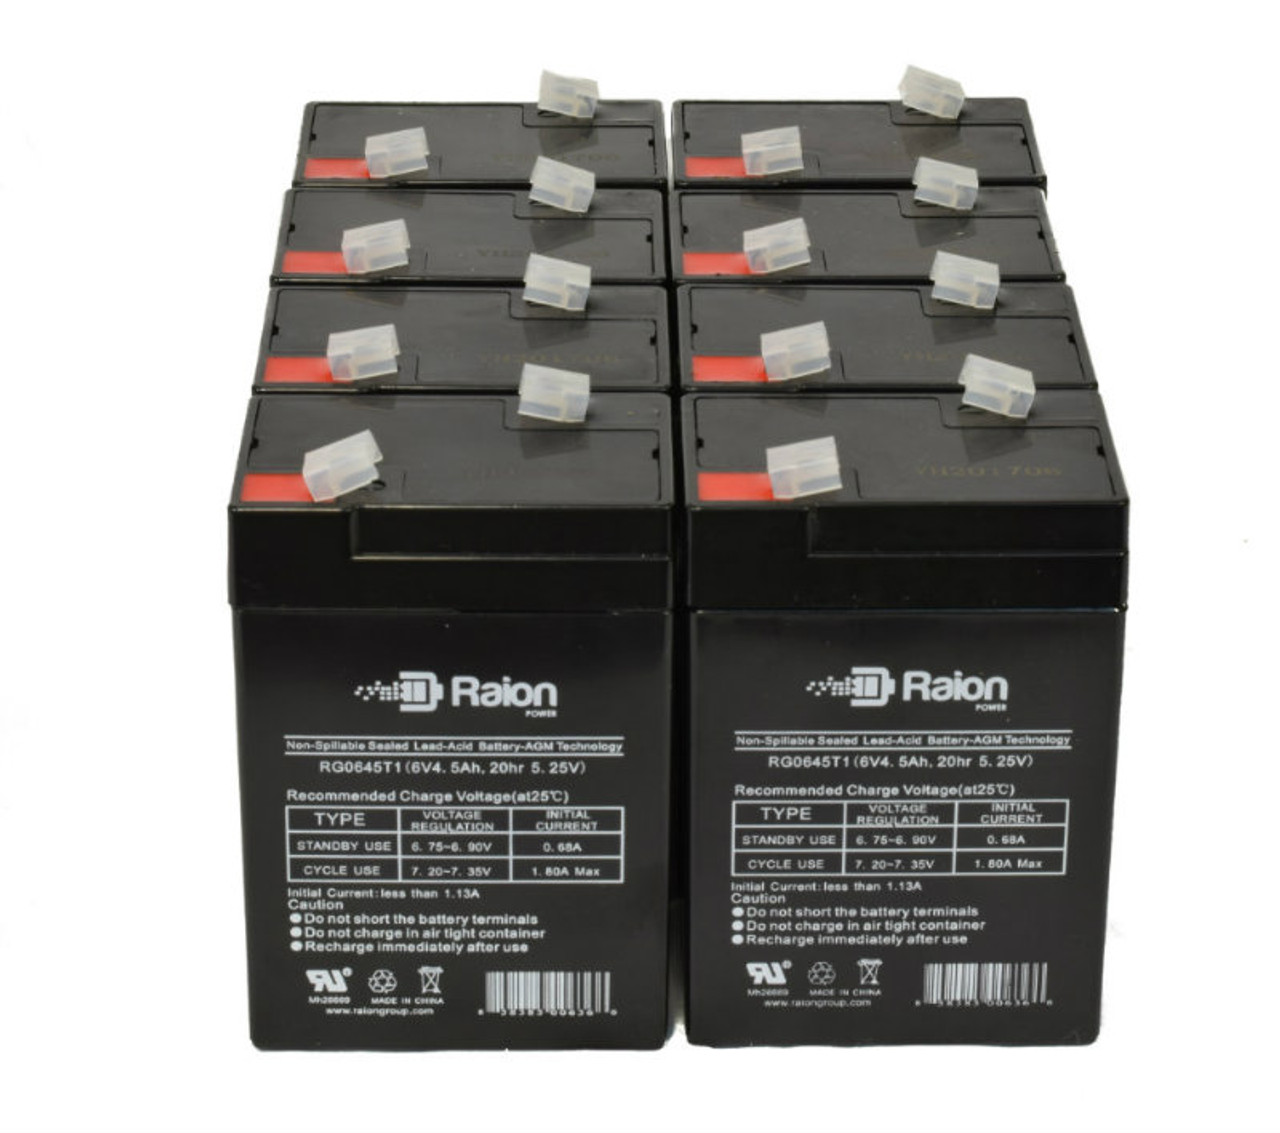 Raion Power 6 Volt 4.5Ah RG0645T1 Replacement Battery for Technacell EP640 Option - CHK DIM - 8 Pack